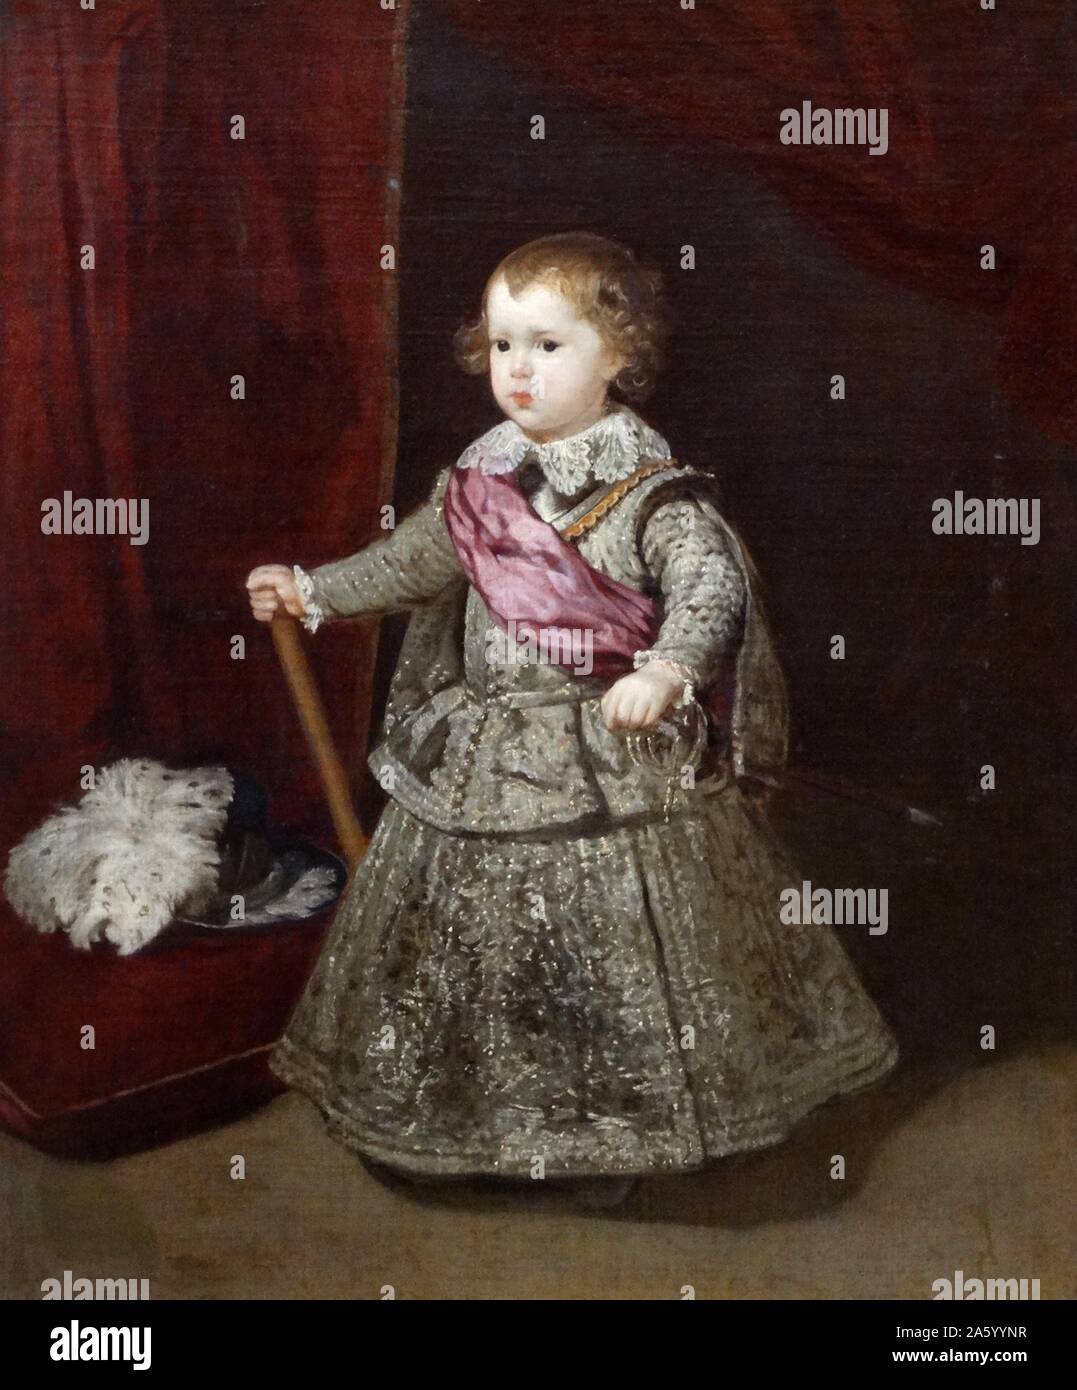 Painting titled 'Don Baltasar Carlos' by Diego Velázquez (1599-1660) a Spanish painter and leading artist for the Court of King Philip IV. Dated 17th Century Stock Photo